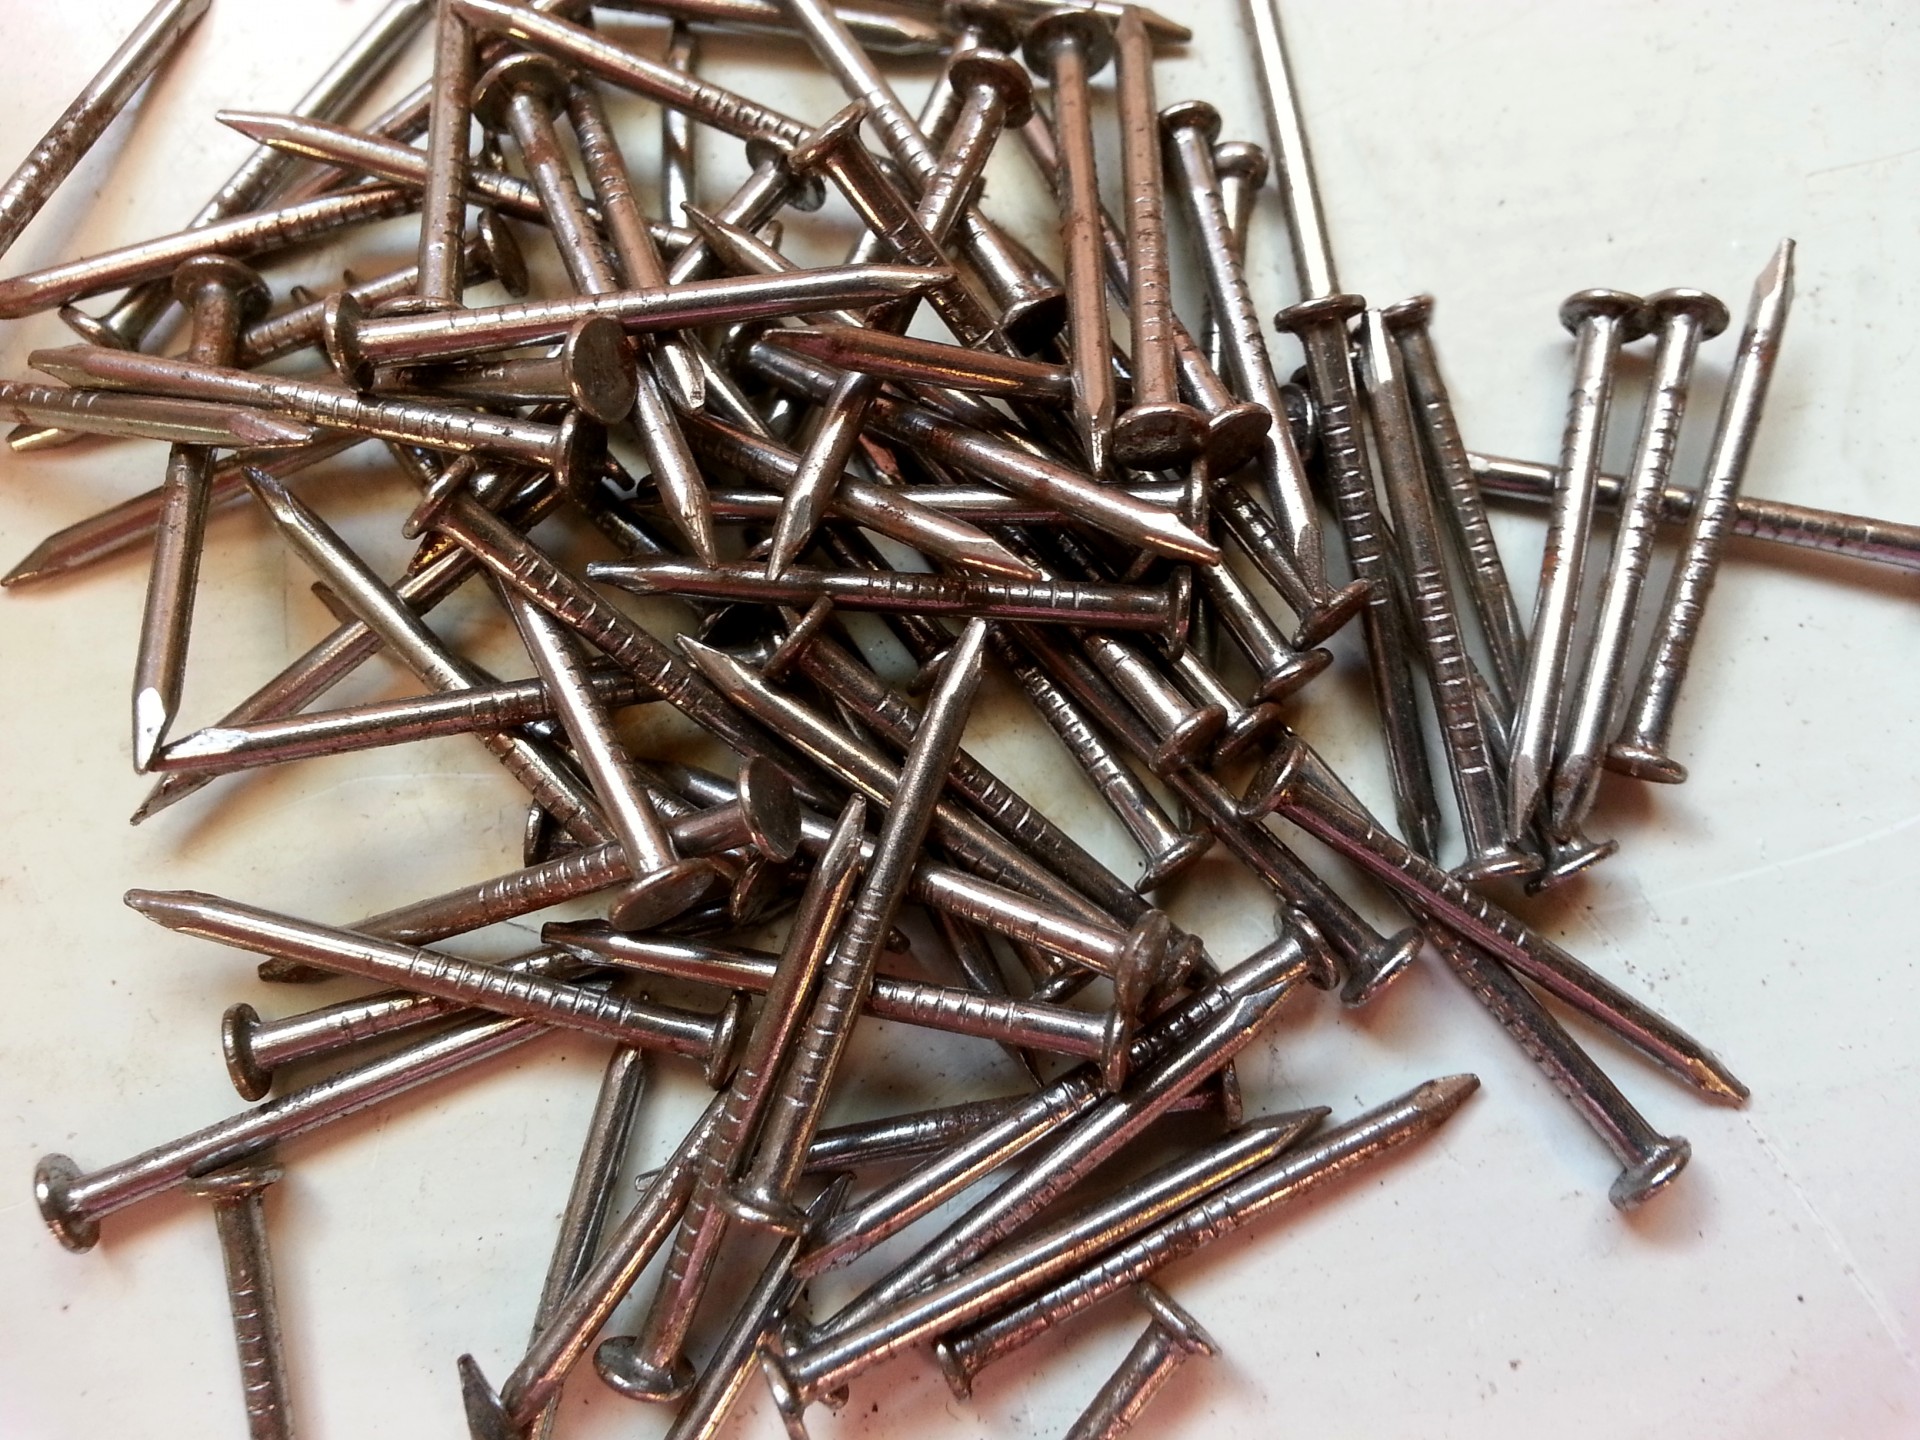 Copper Nails Versus Galvanized Nails for Your Home Projects